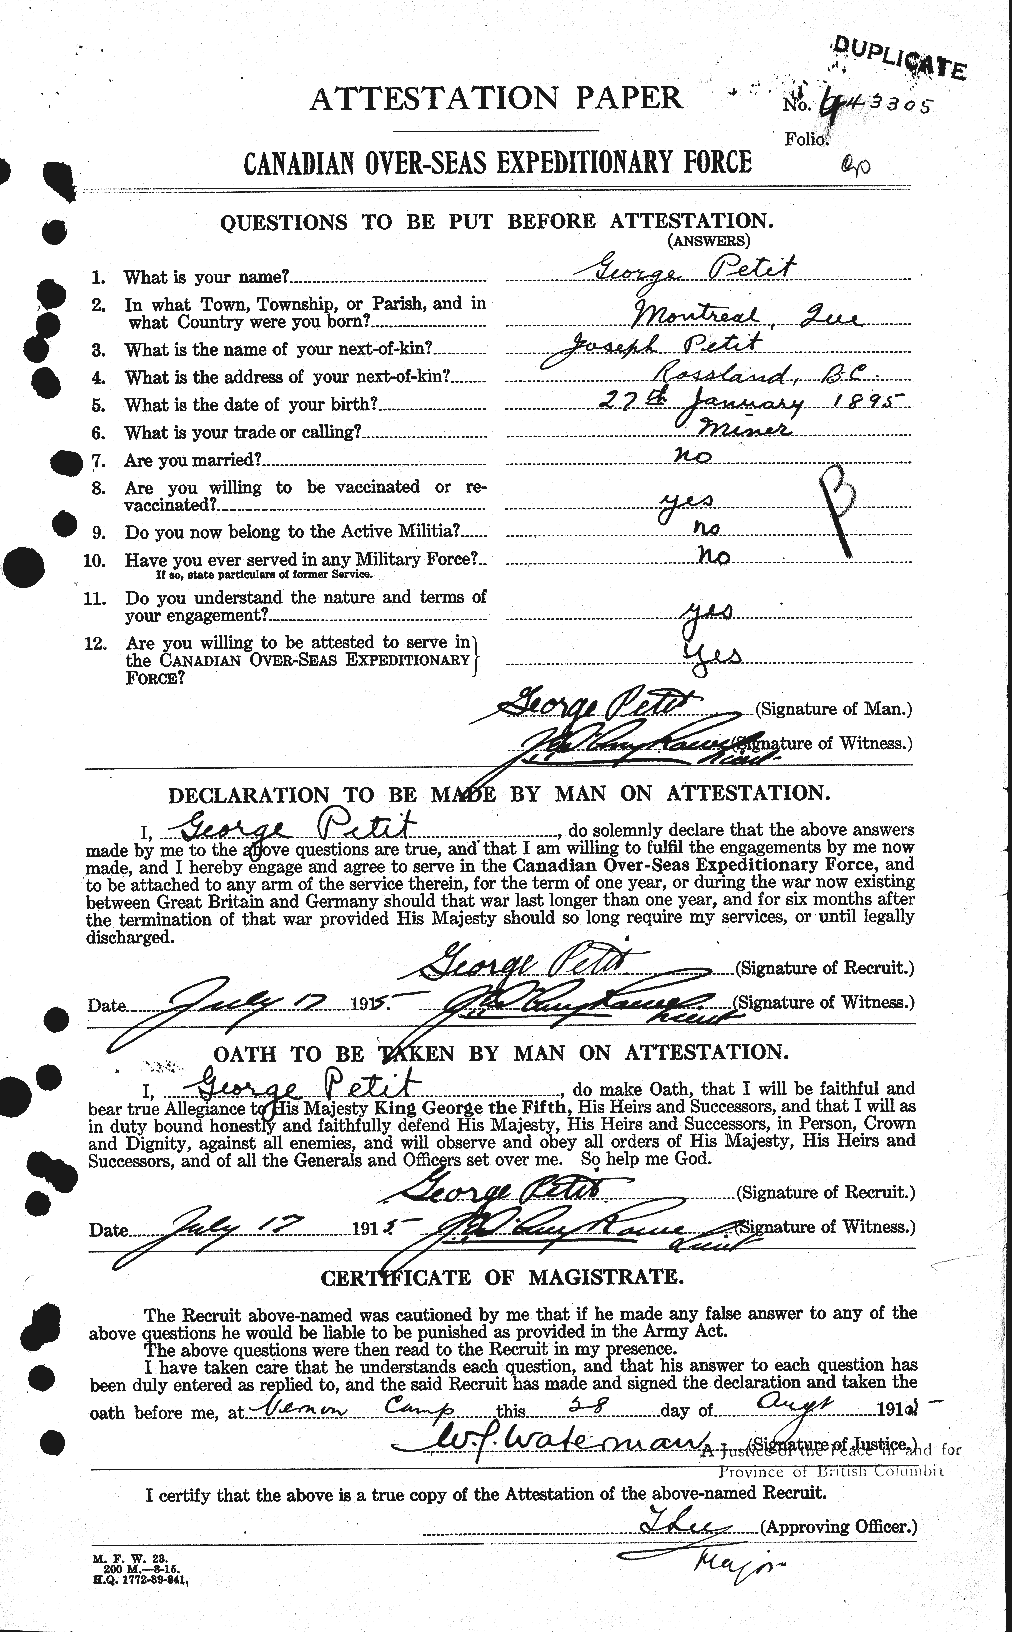 Personnel Records of the First World War - CEF 576167a